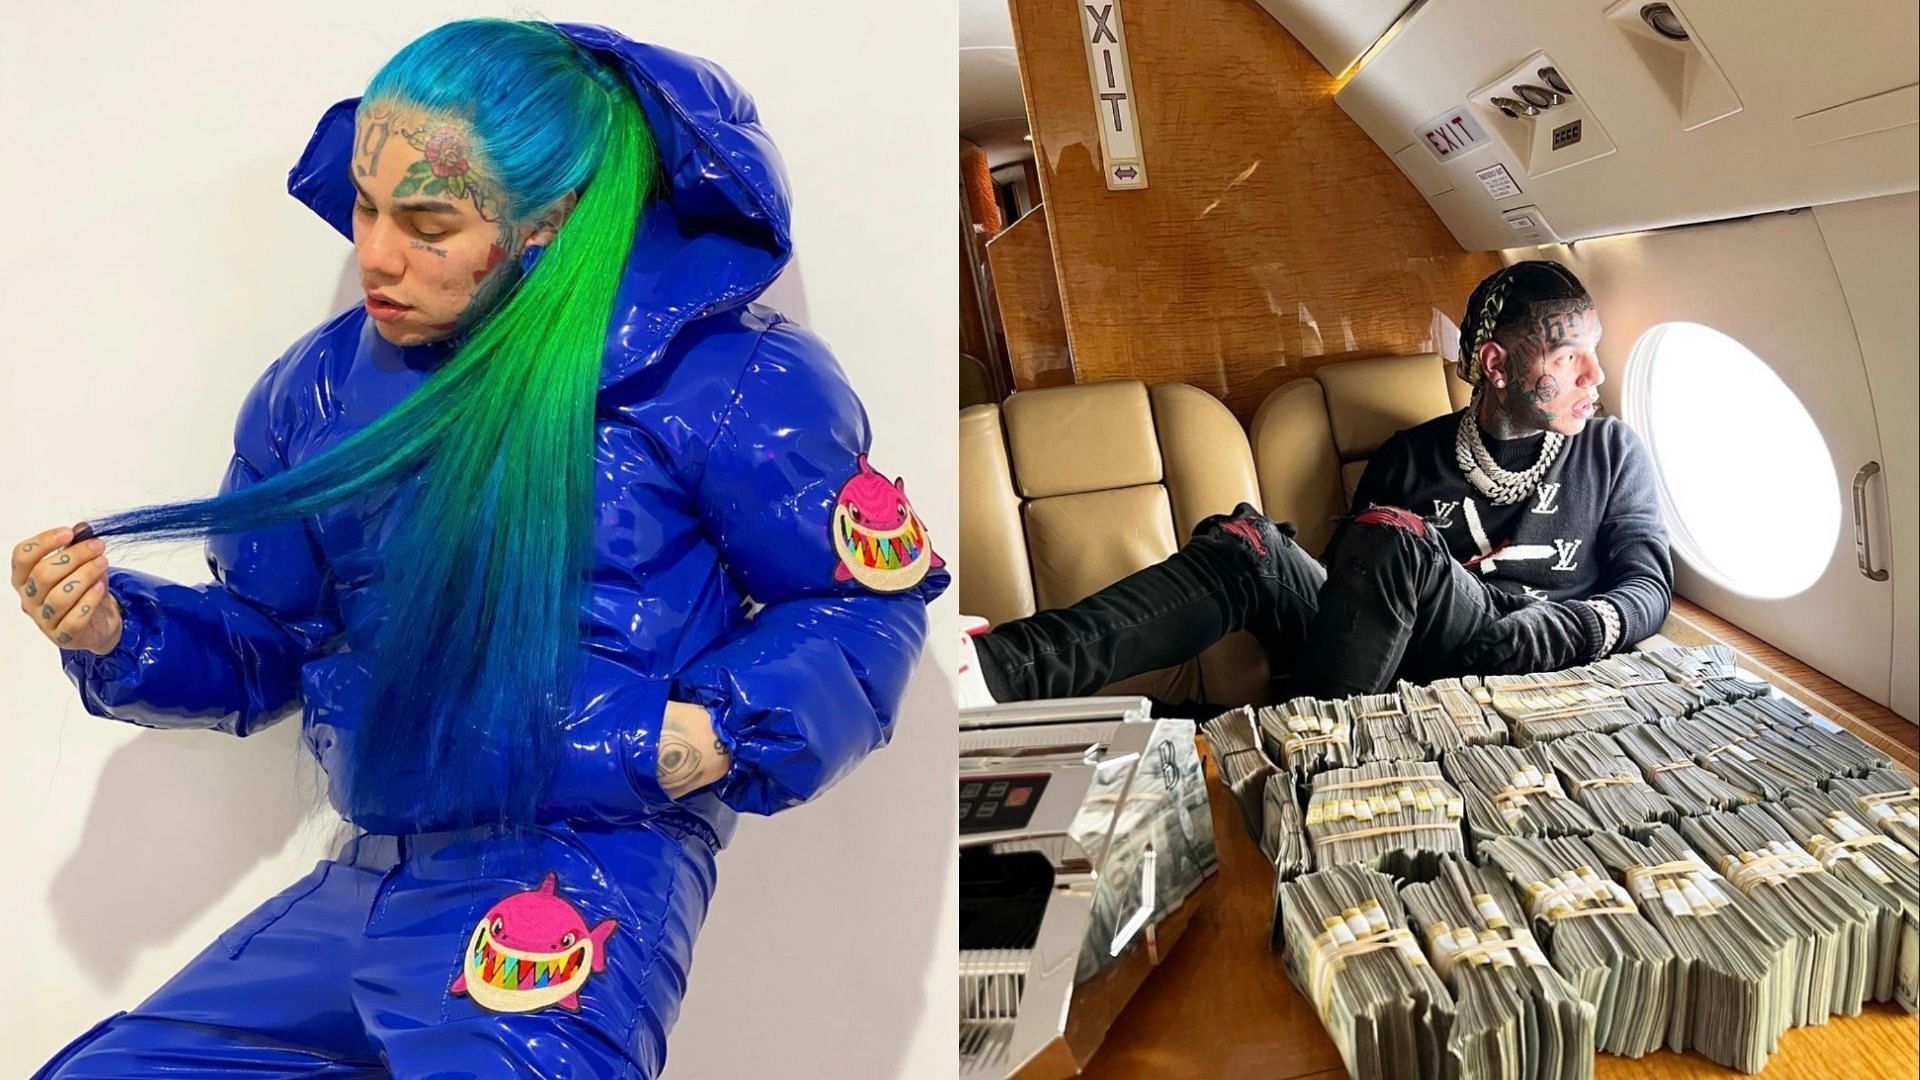 6ix9ine has to pay nearly $10 million in damages. (Images via Instagram/@6ix9ine)